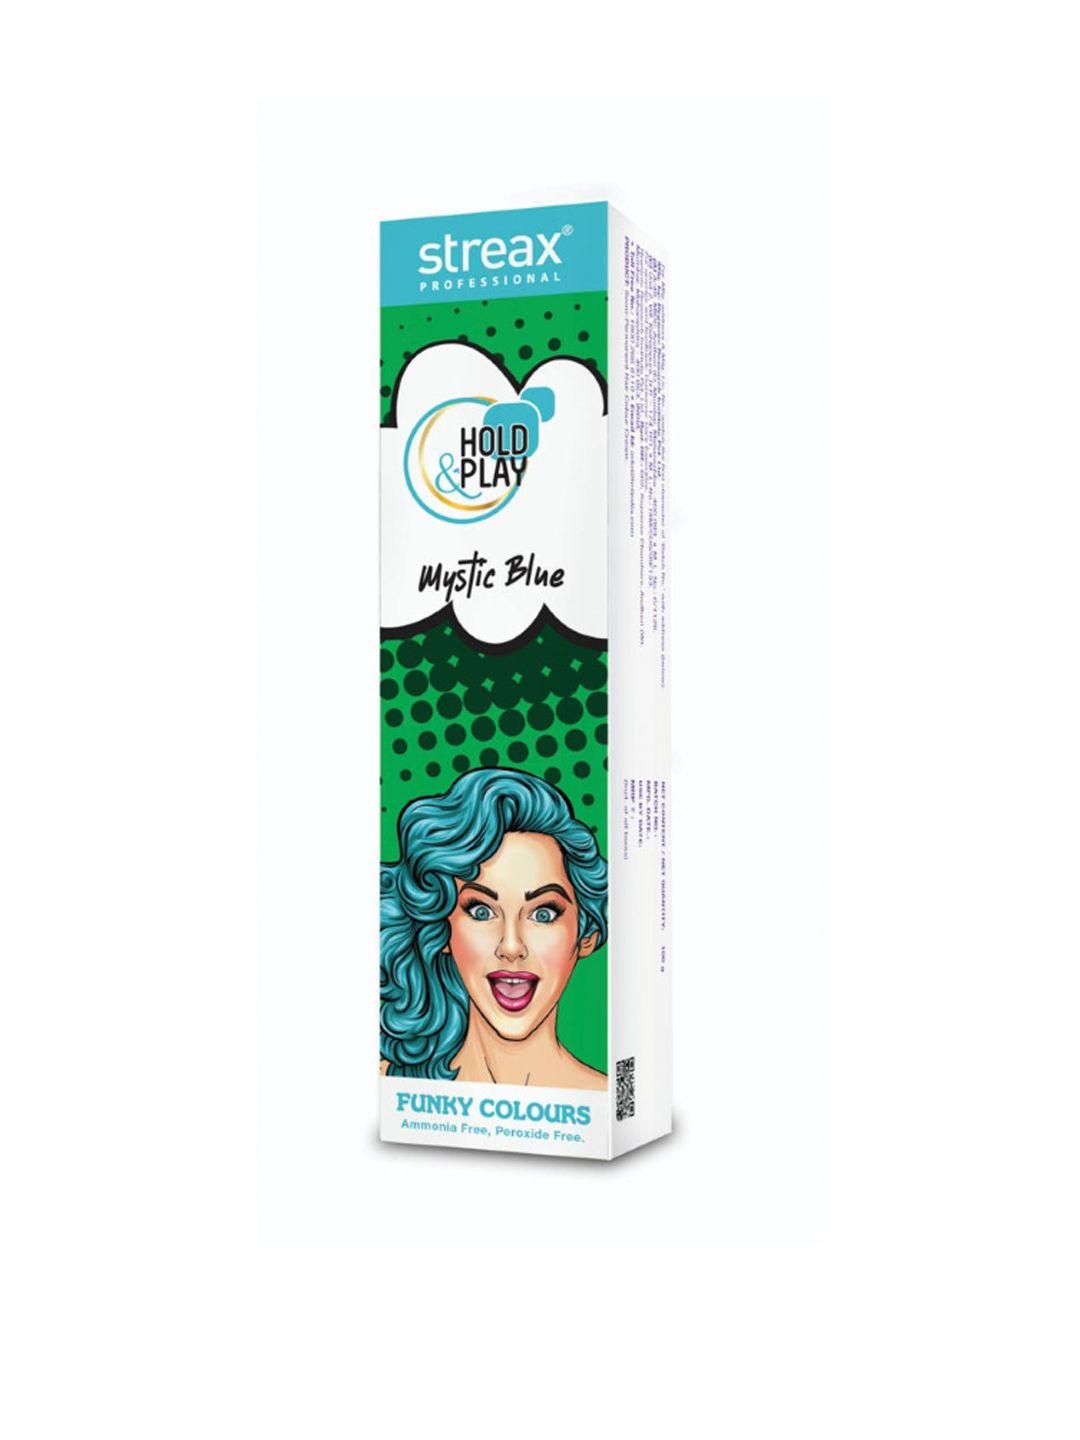 streax professional hold & play funky colours - mystic blue- 100 g